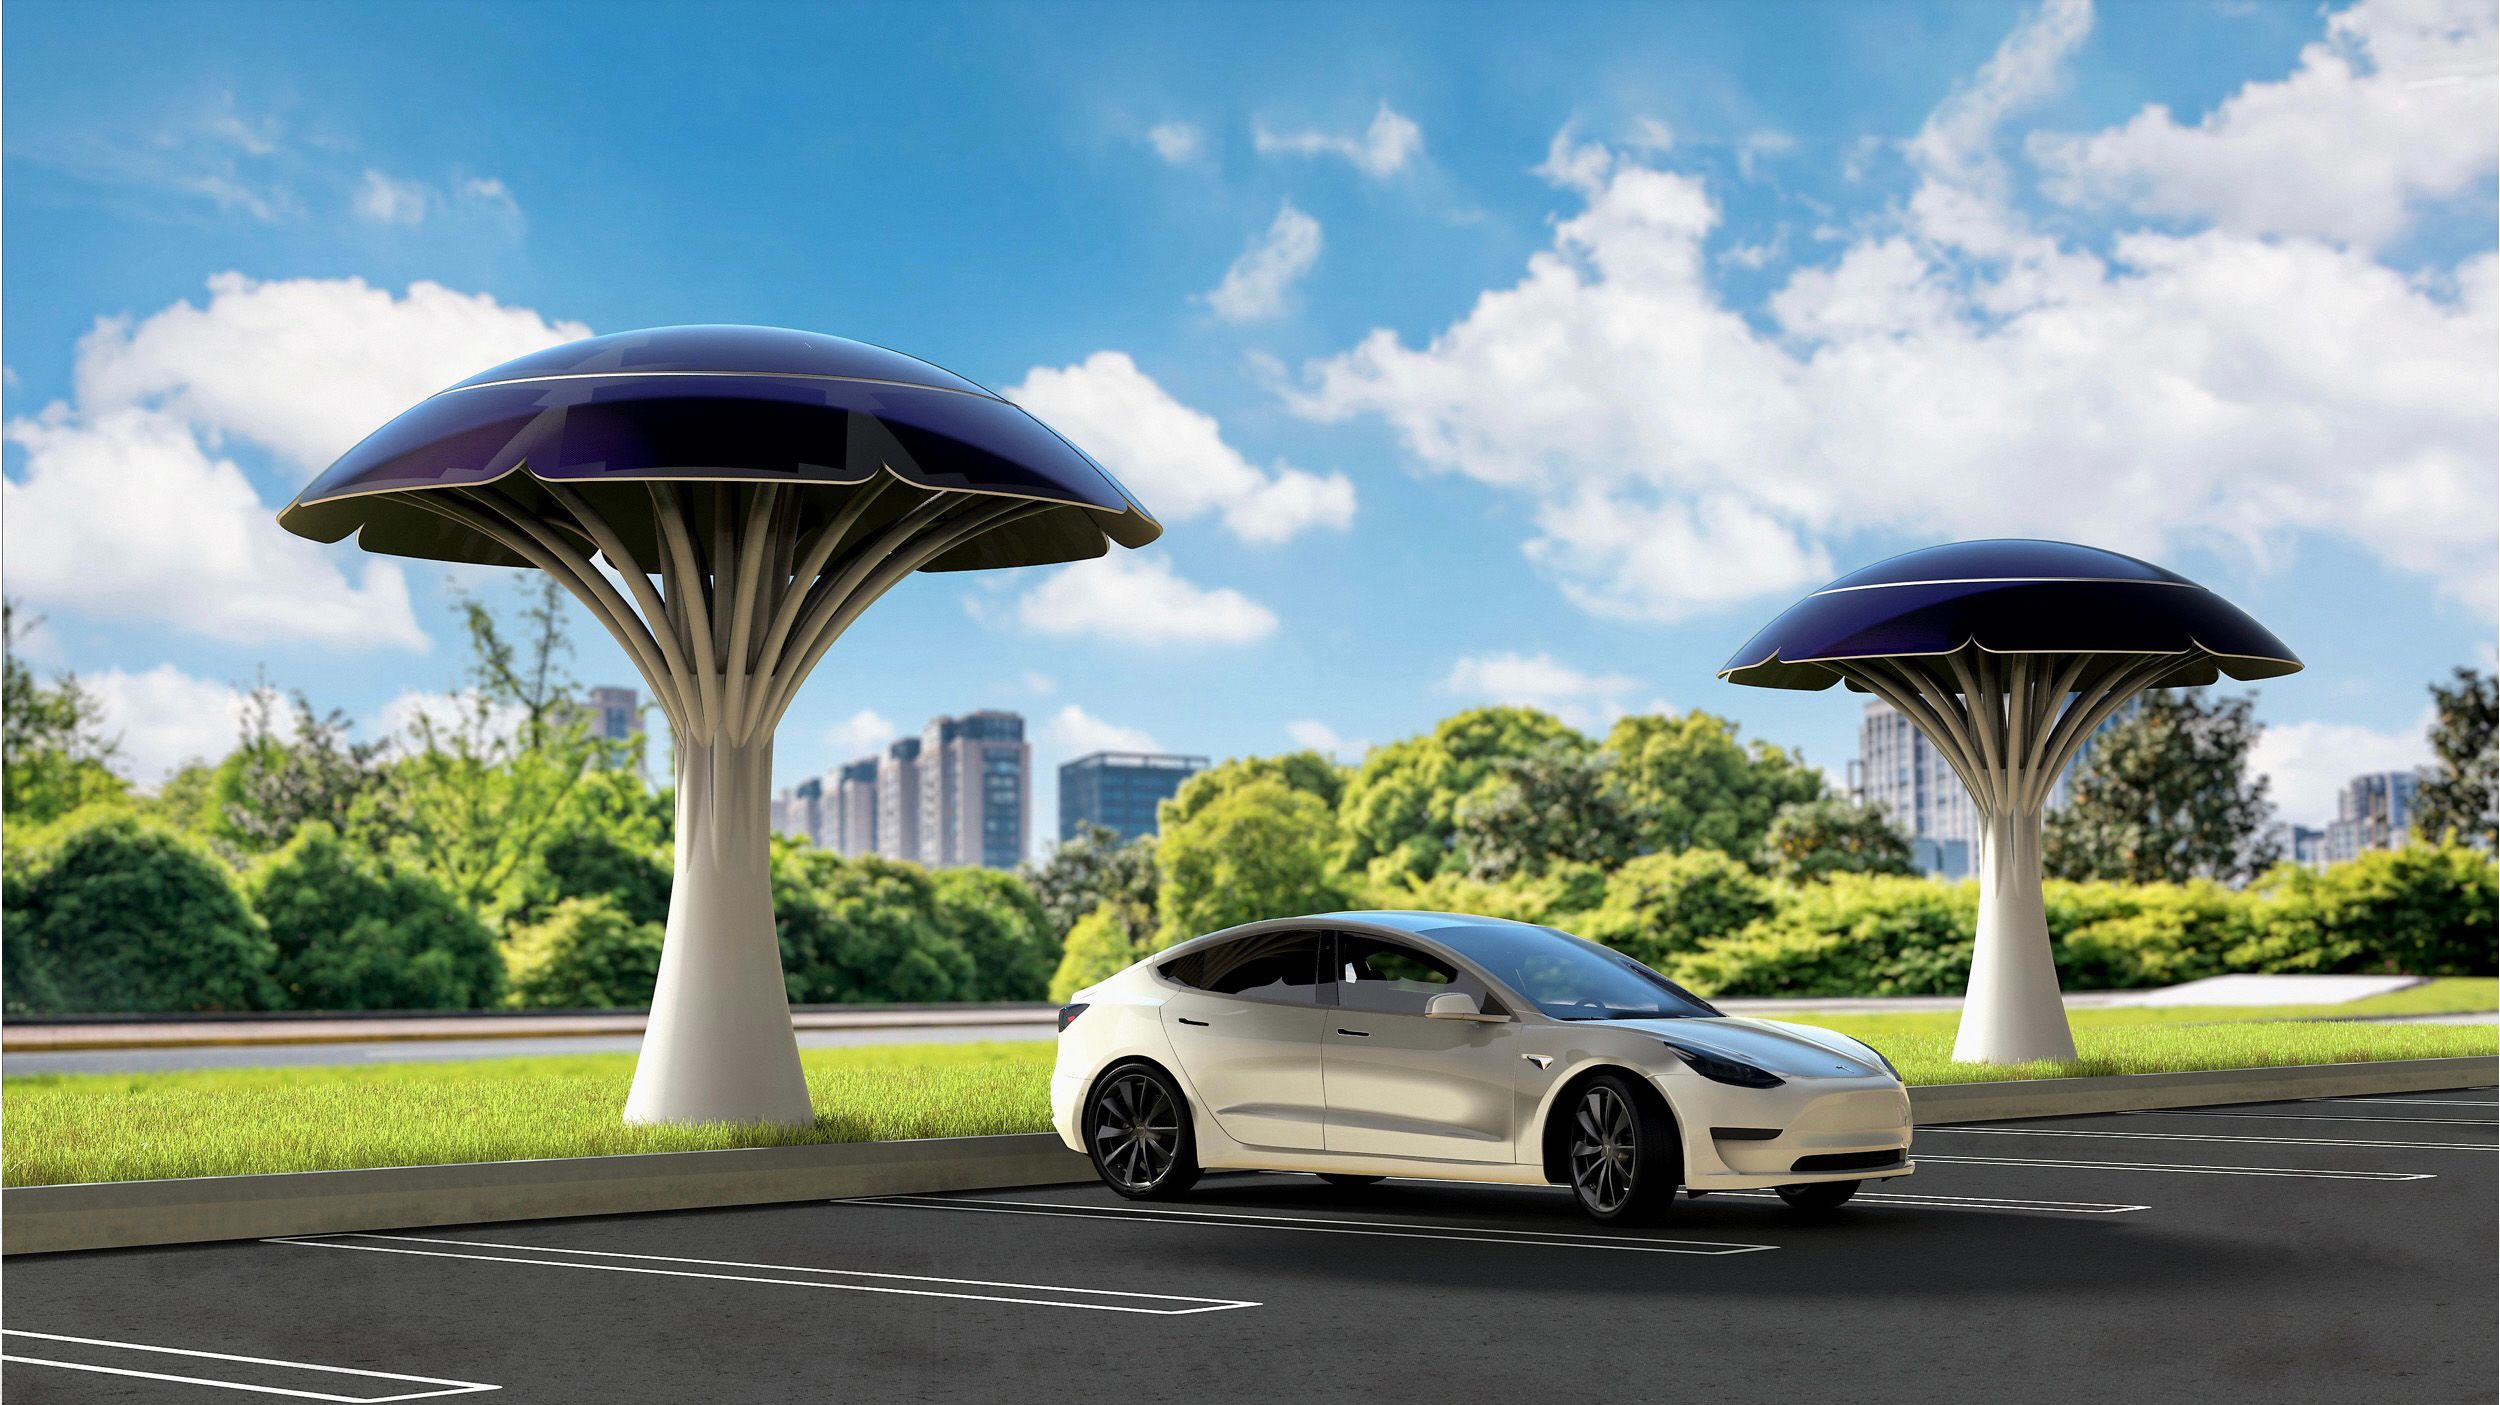 Solar trees could soon be charging your car